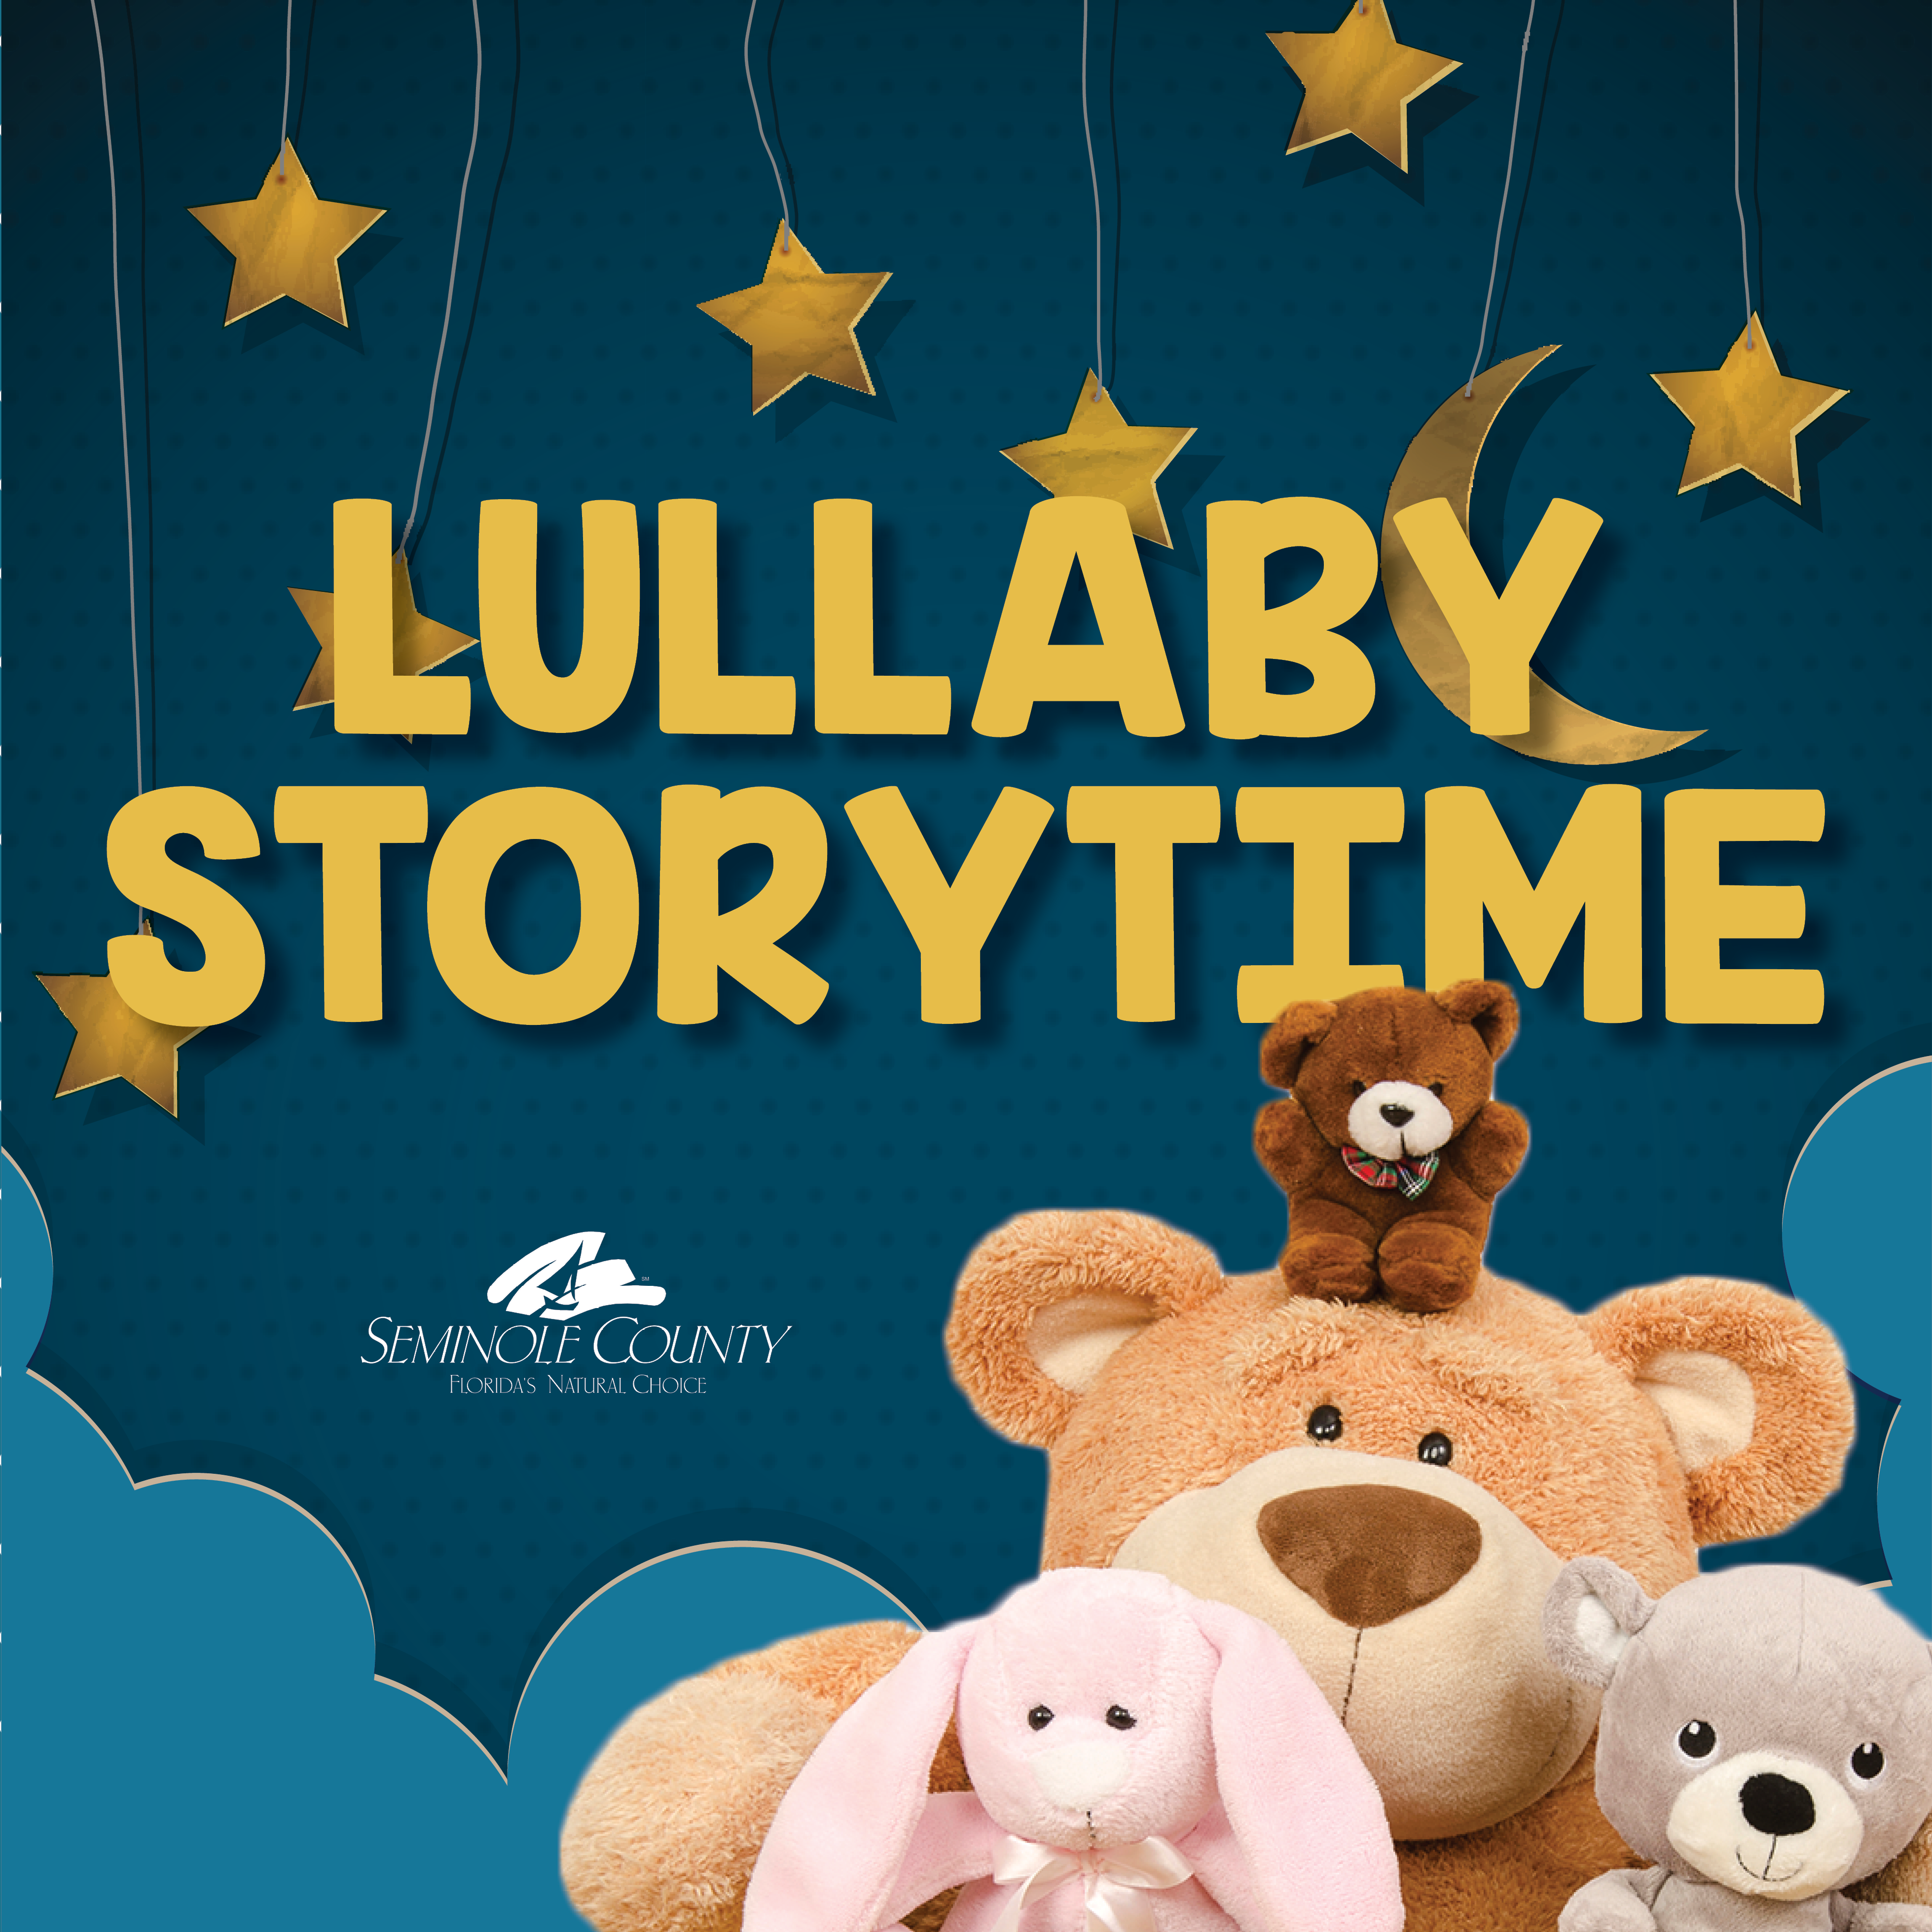 Lullaby Storytime